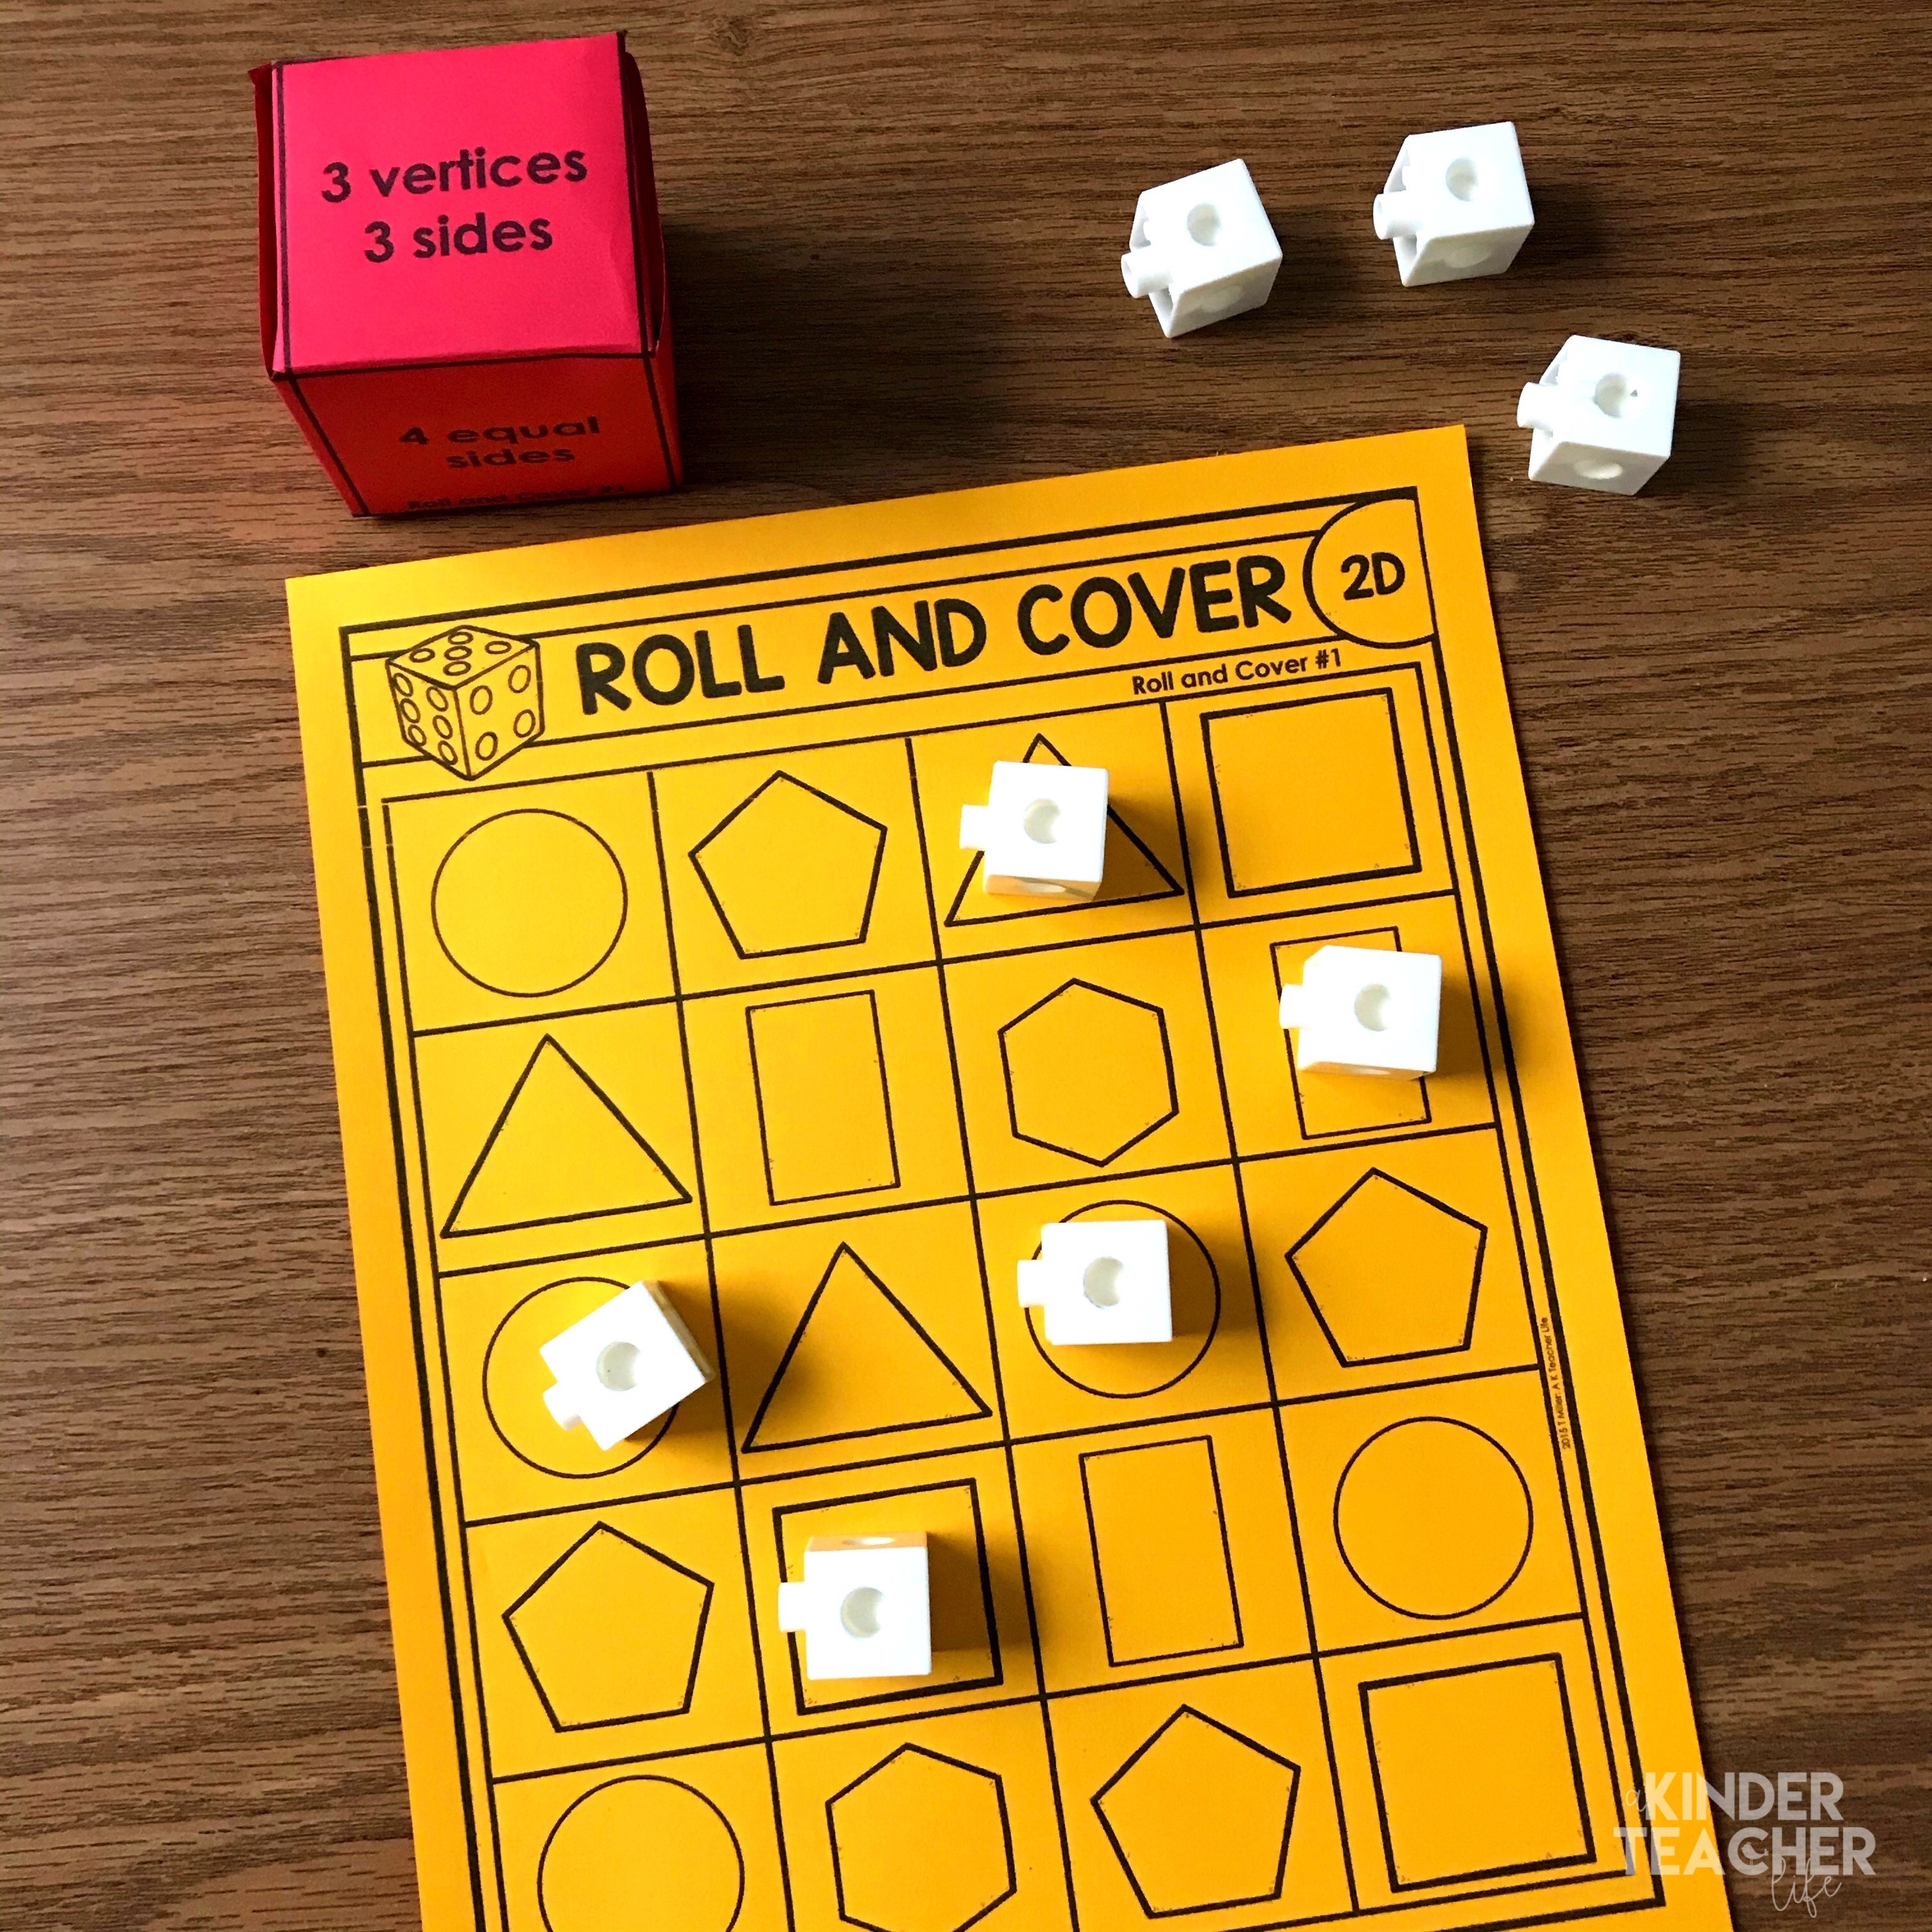 Roll the die, read the attribute and cover the shape that matches. 